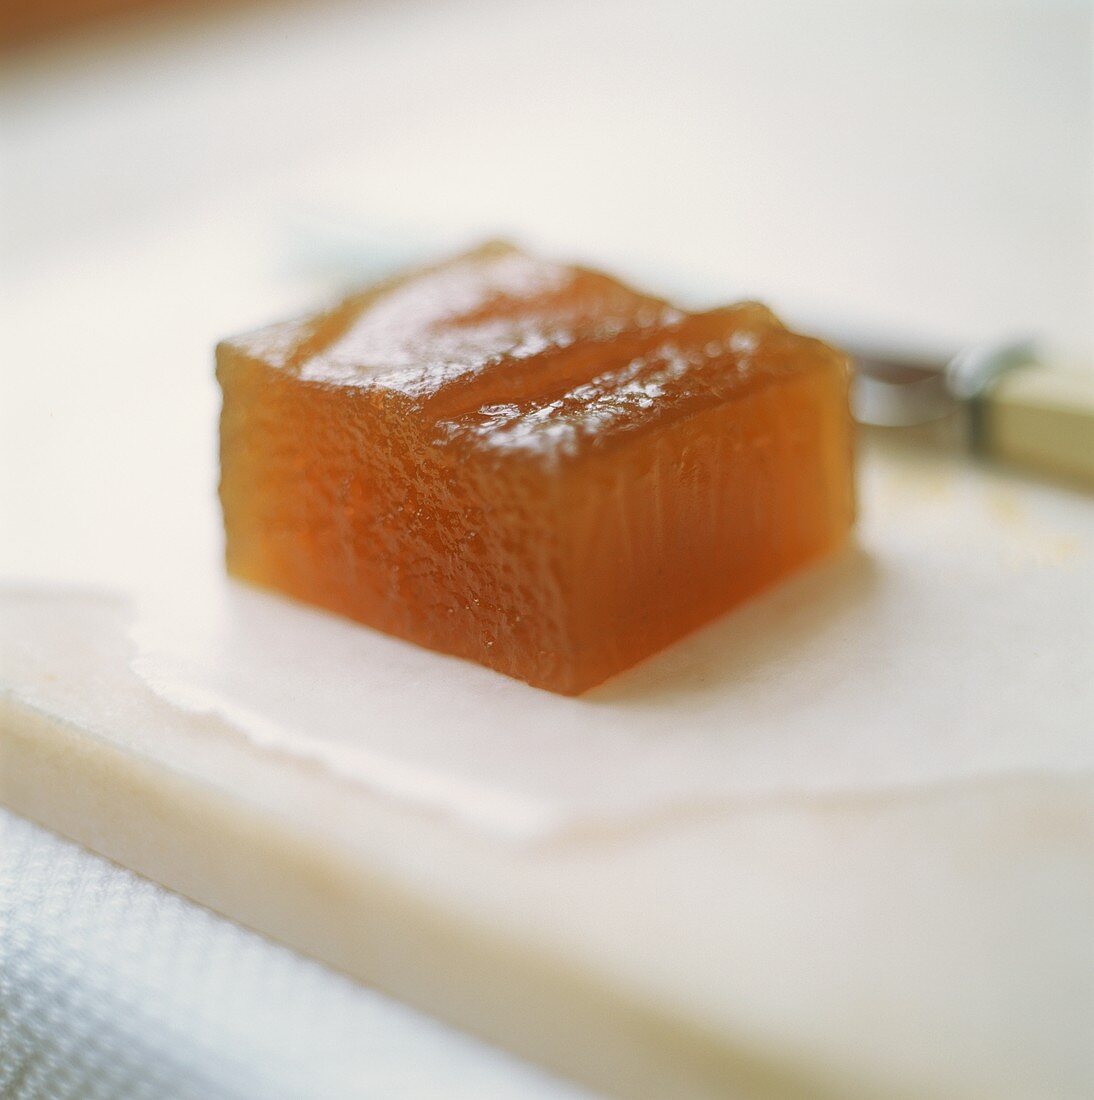 A cube of quince jelly